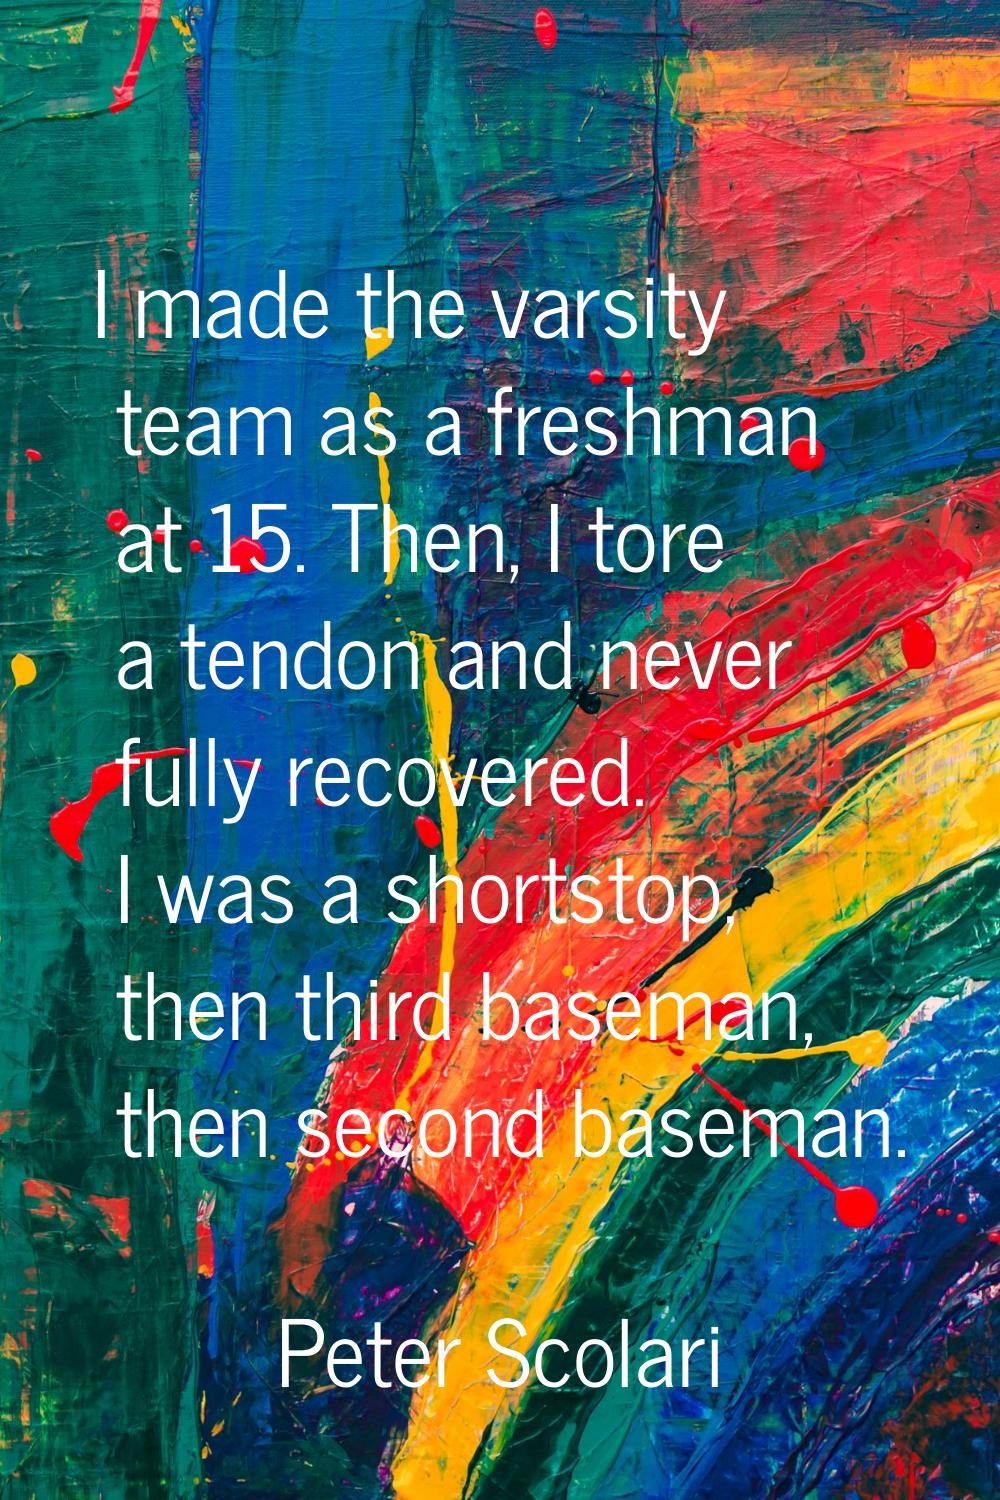 I made the varsity team as a freshman at 15. Then, I tore a tendon and never fully recovered. I was